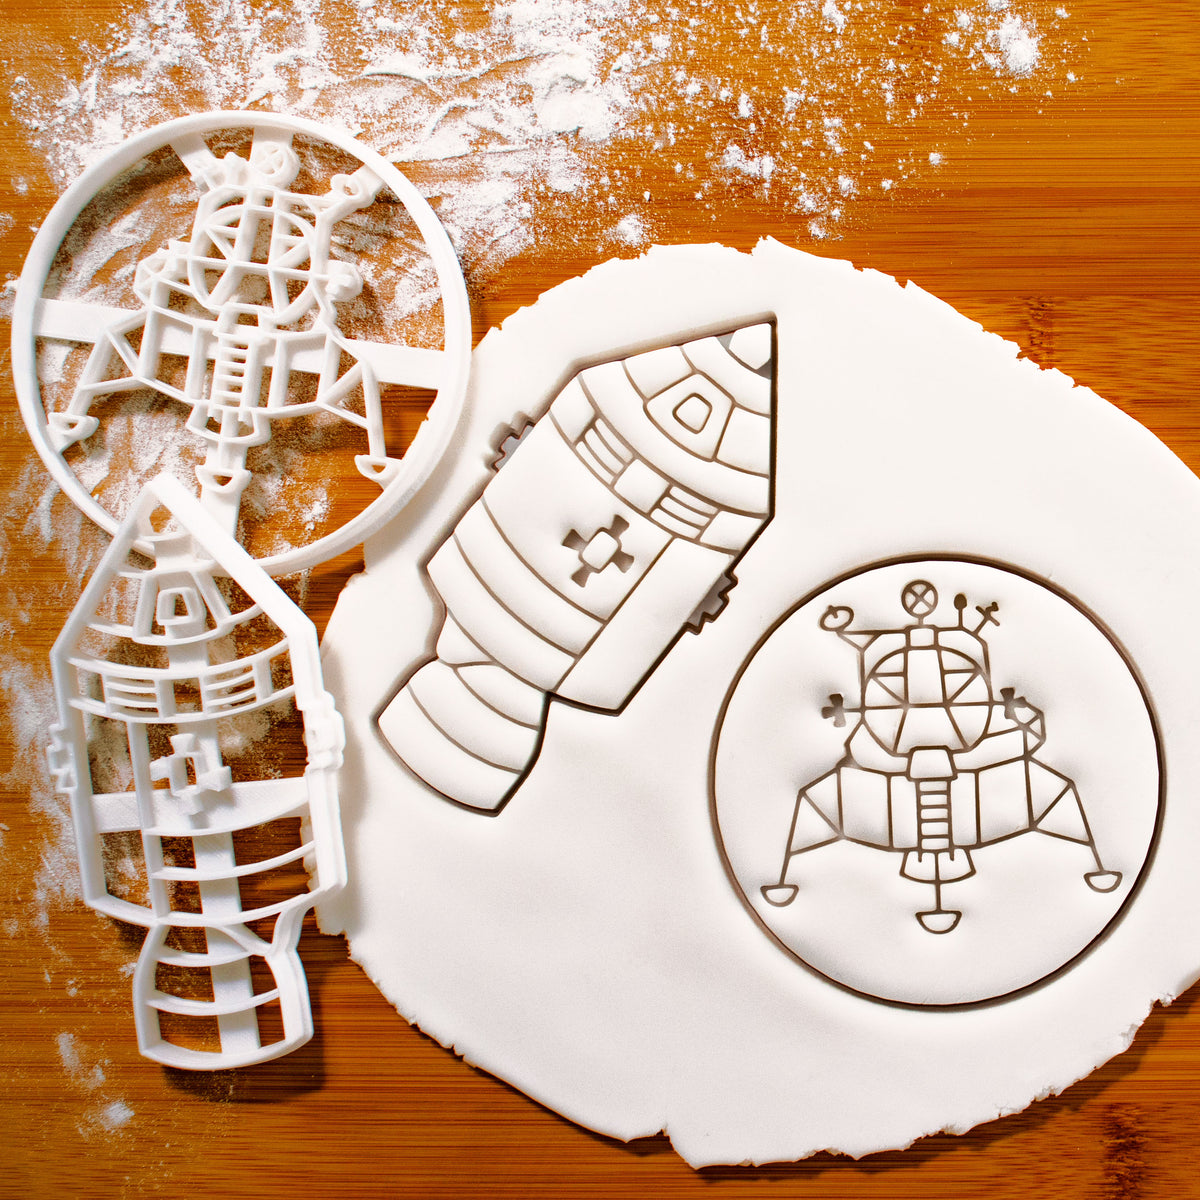 Space cookie cutter